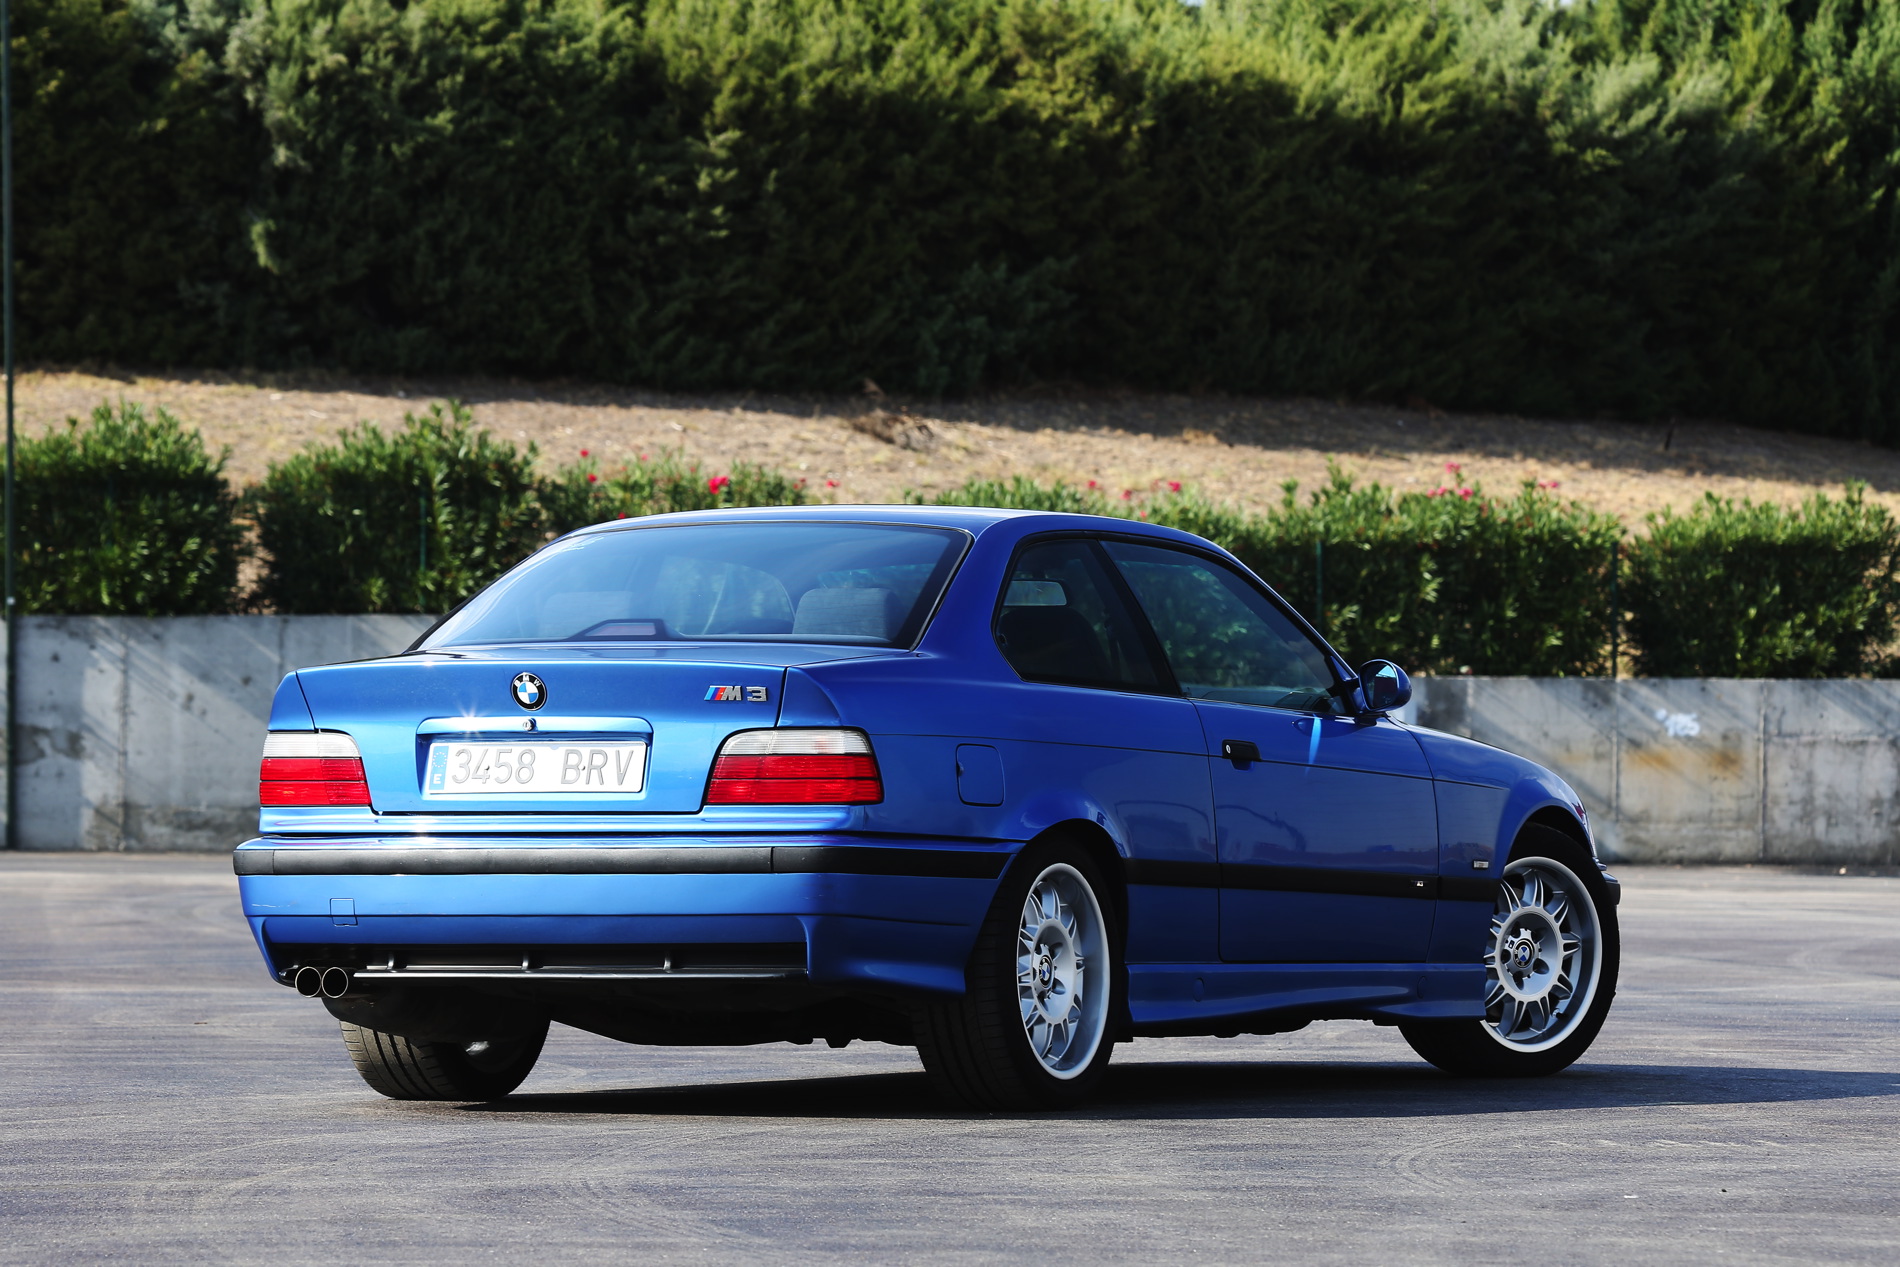 Buyer's Guide: What to look for in a BMW E36 M3